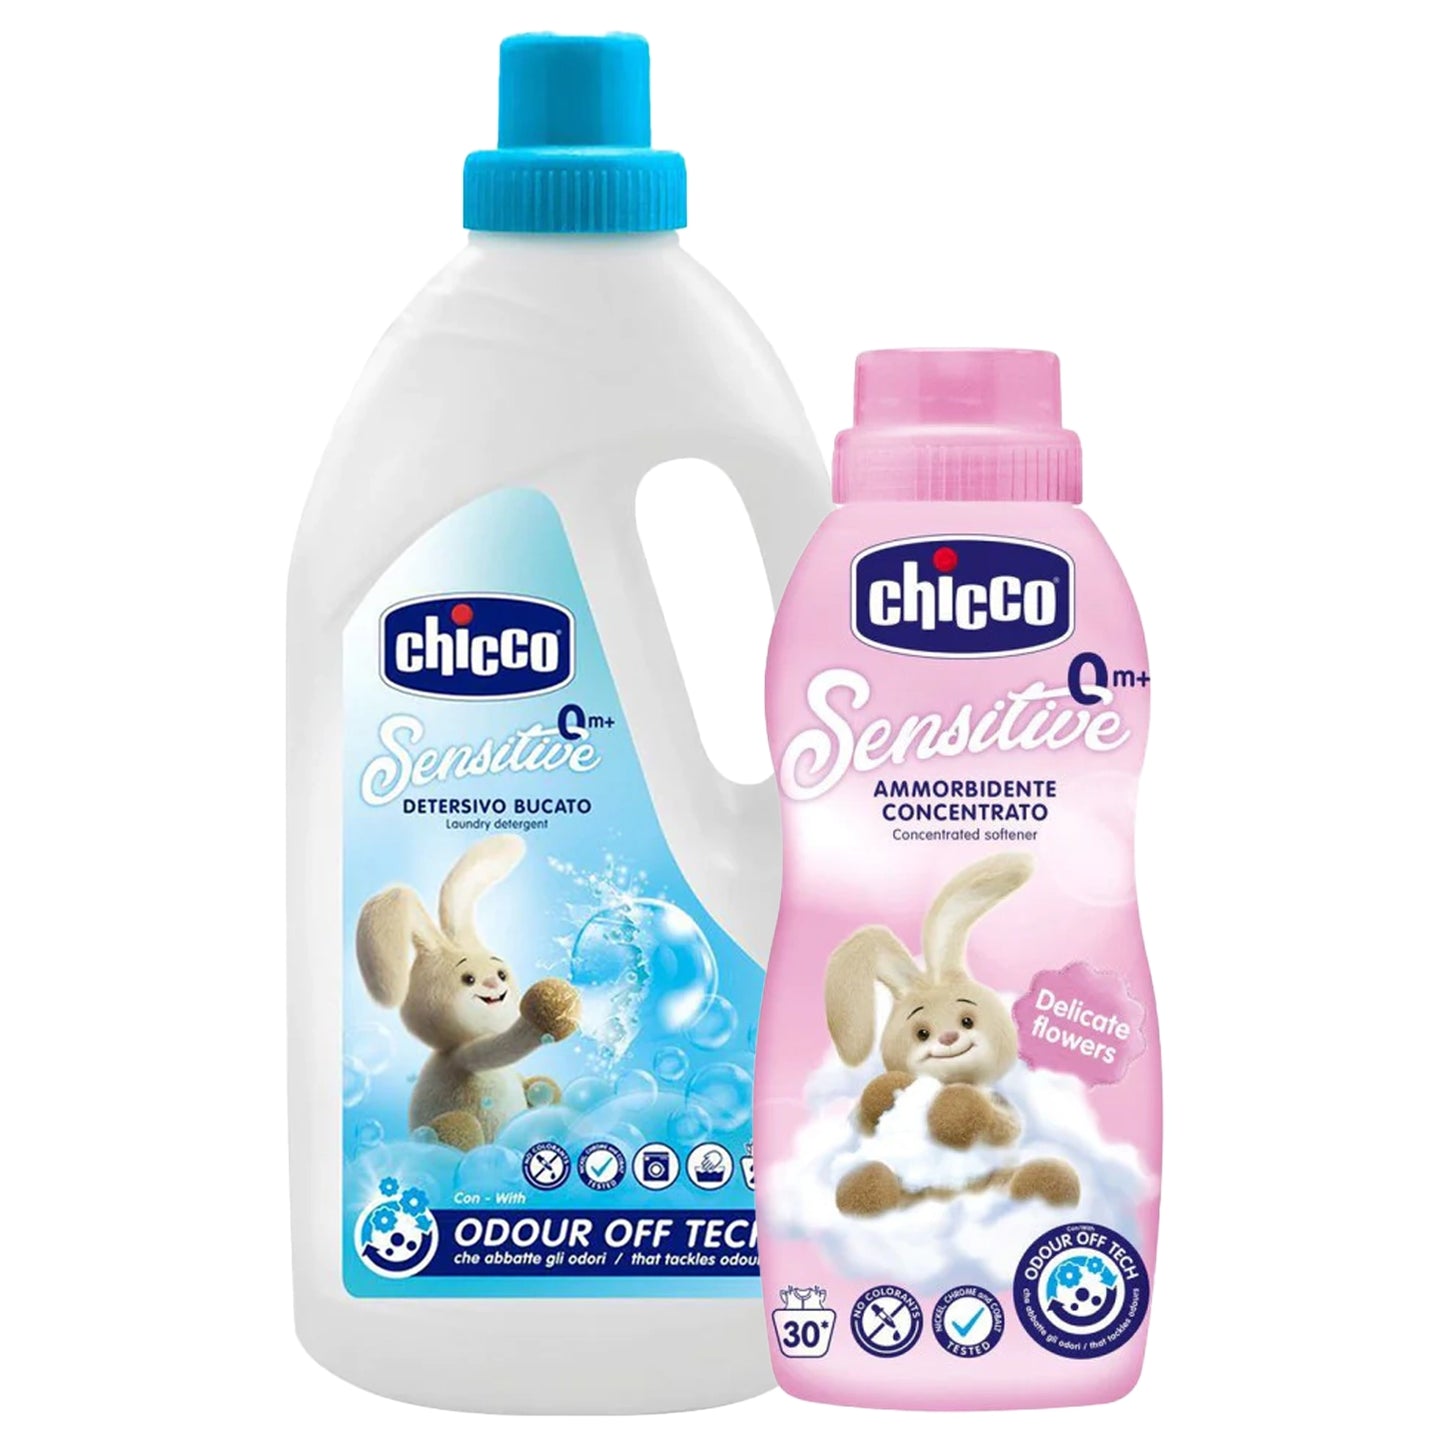 Chicco Baby Laundry Detergent & Softener Combo